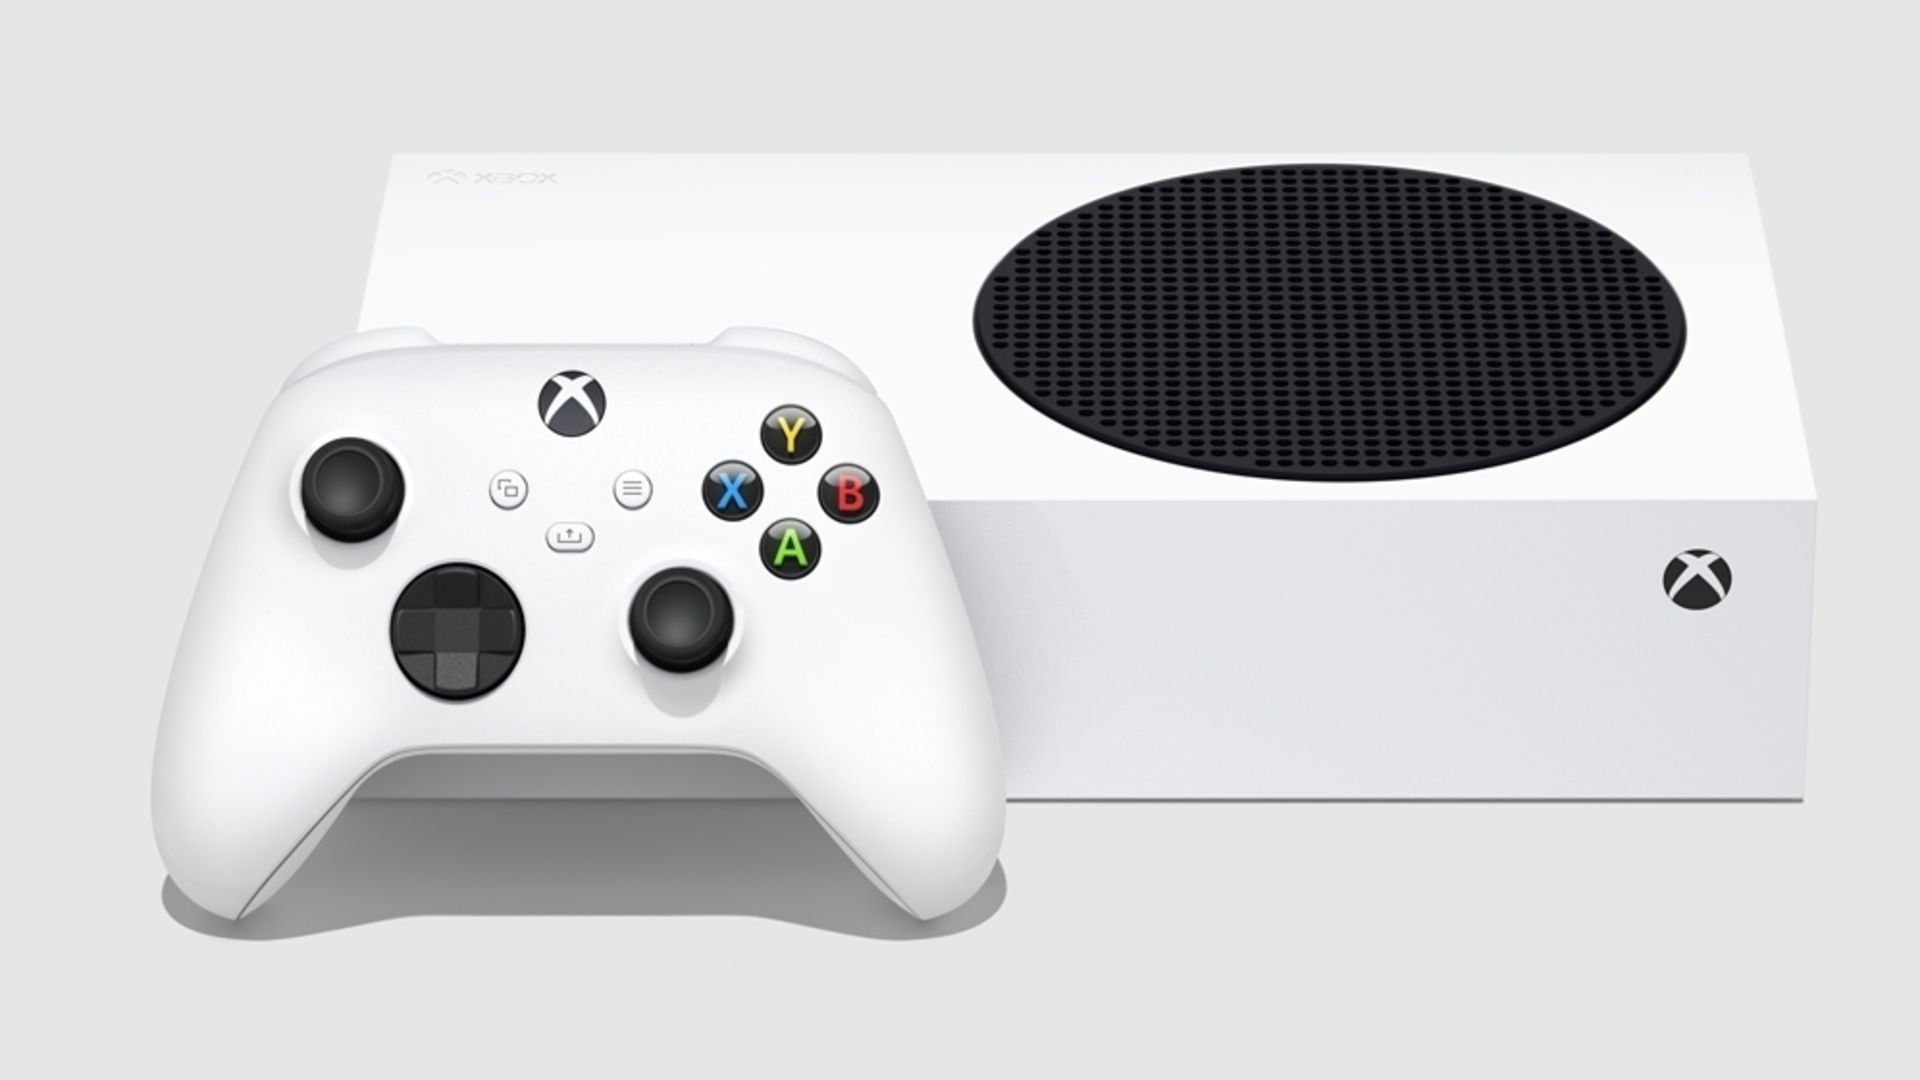 The Xbox Series S console with the controller on its side.